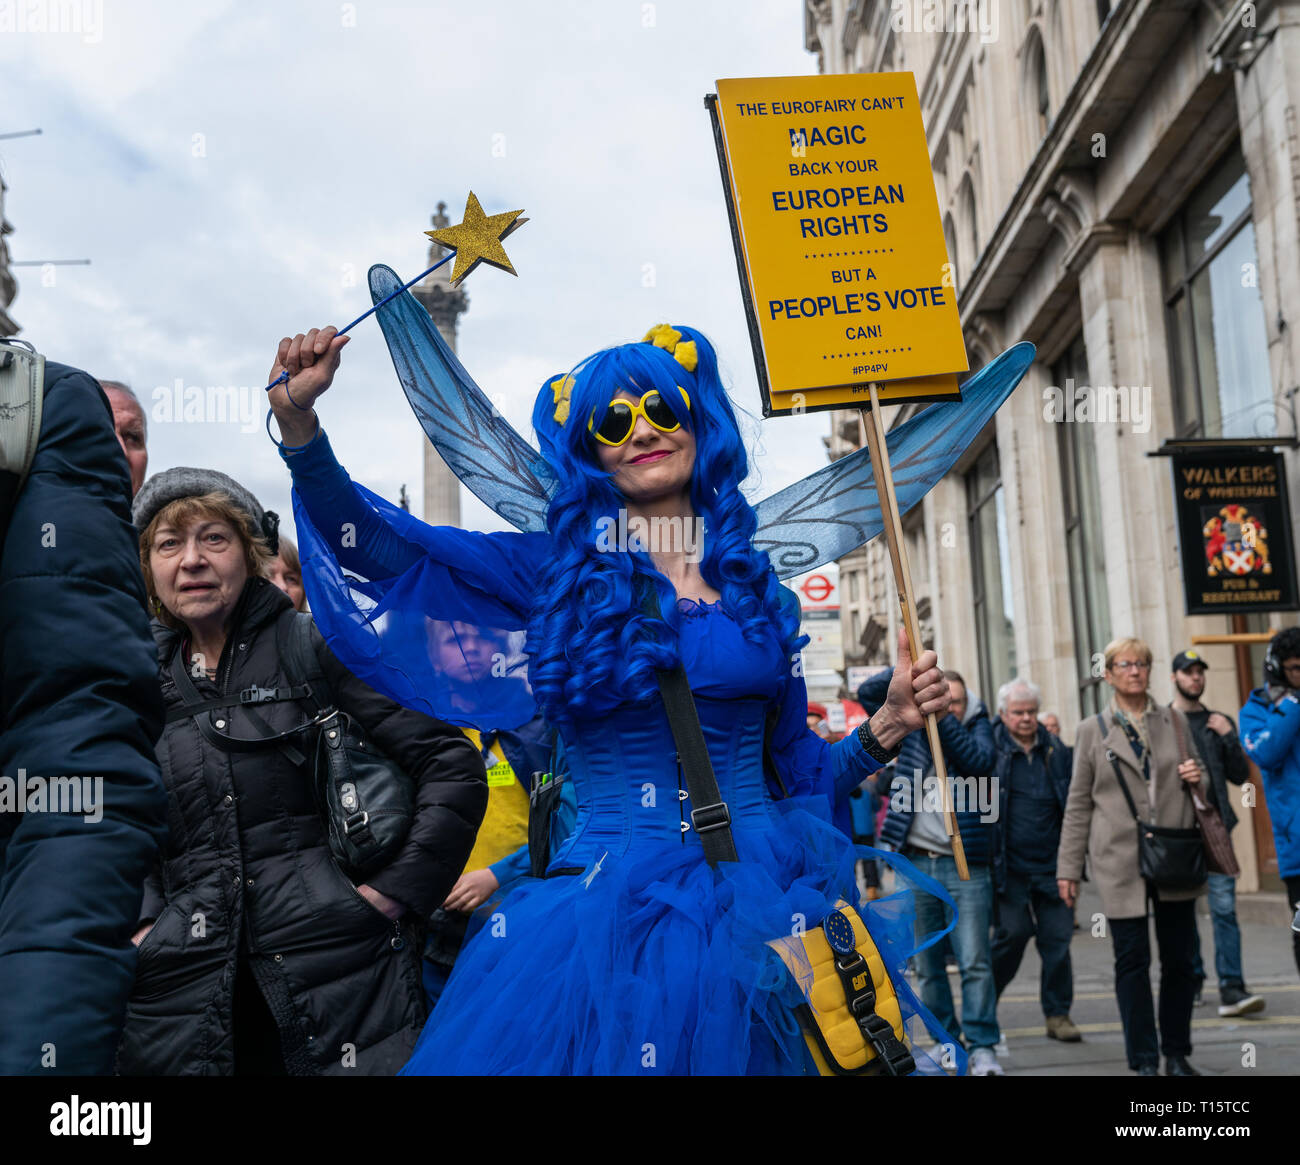 London, UK. 23rd Mar 2019. Thousands of people come to a demonstration calling for a second referendum on Britain exit from EU, known as Brexit. Credit: AndKa/Alamy Live News Stock Photo